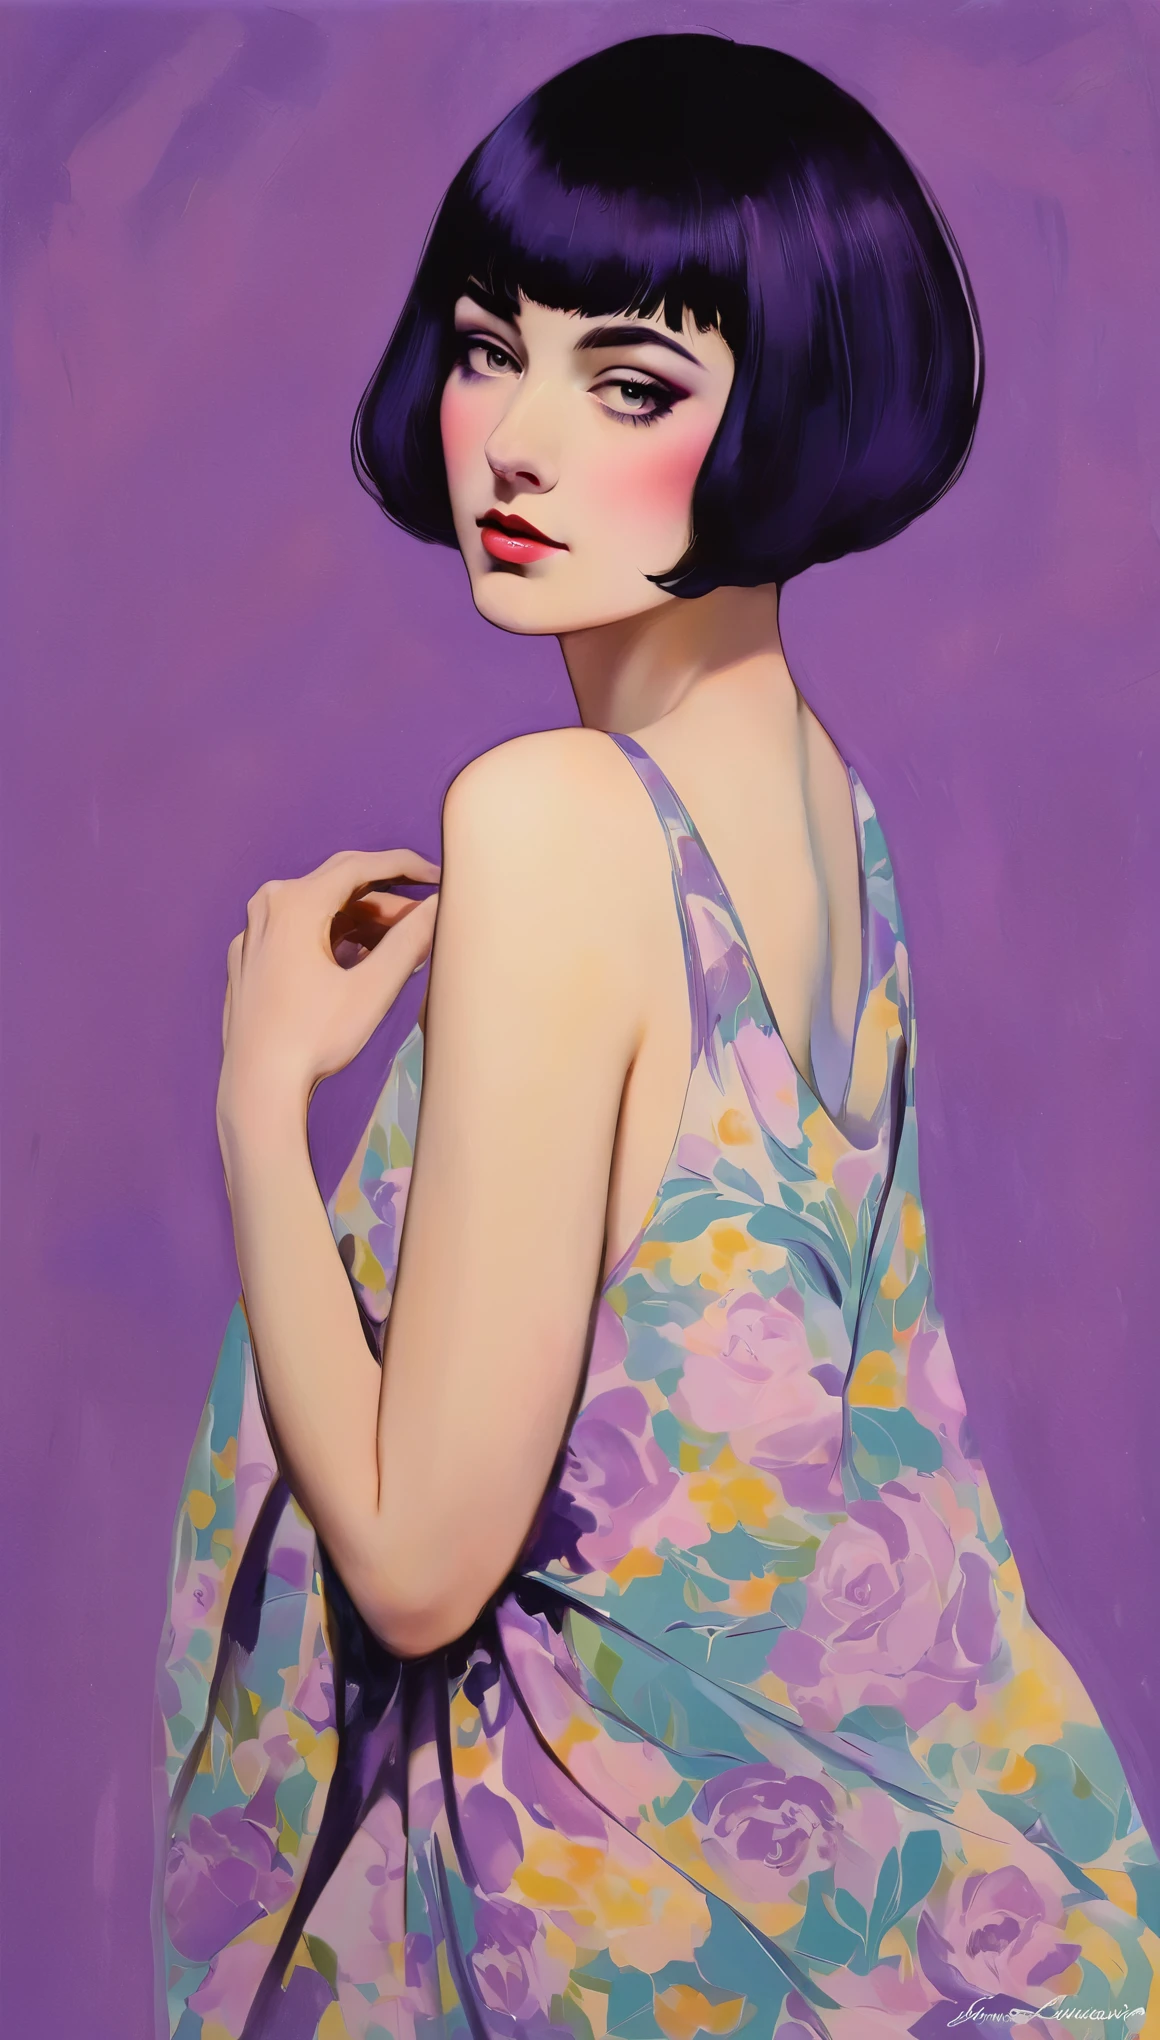 chiaroscuro technique on sensual illustration of an elegant queen (((short hair with bangs:1.4、Beautiful bangs) , vintage ,silky dress, matte painting, by John Singer Sargent, by Harumi Hironaka, extremely soft colors, dark vibrant, purple pastel, highly detailed, digital artwork, high contrast, dramatic, refined, tonal, an intimate, seductive studio setting with a focus on sensuality and romance. Utilize soft, warm lighting that bathes the space in a gentle, inviting glow. Incorporate luxurious fabrics, plush furnishings, and a touch of decadence to evoke an opulent ambiance. The scene should exude an air of serenity and anticipation, inviting the viewer into a sensual and romantic space